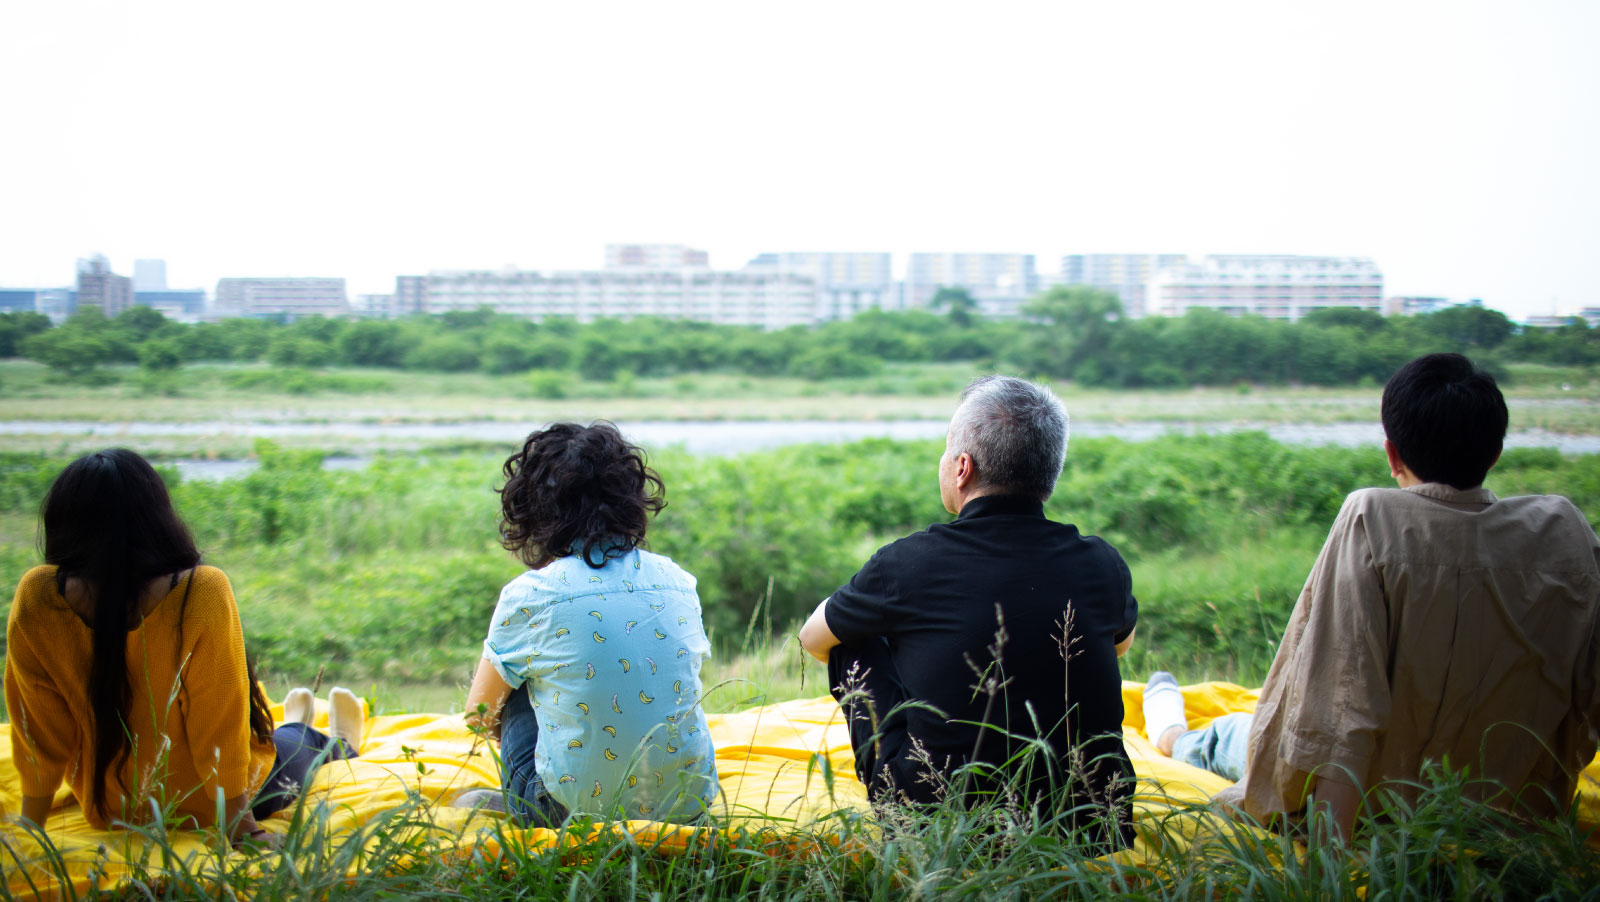 Koki Tanaka Abstracted | Family 2 Four People Sitting On A Field